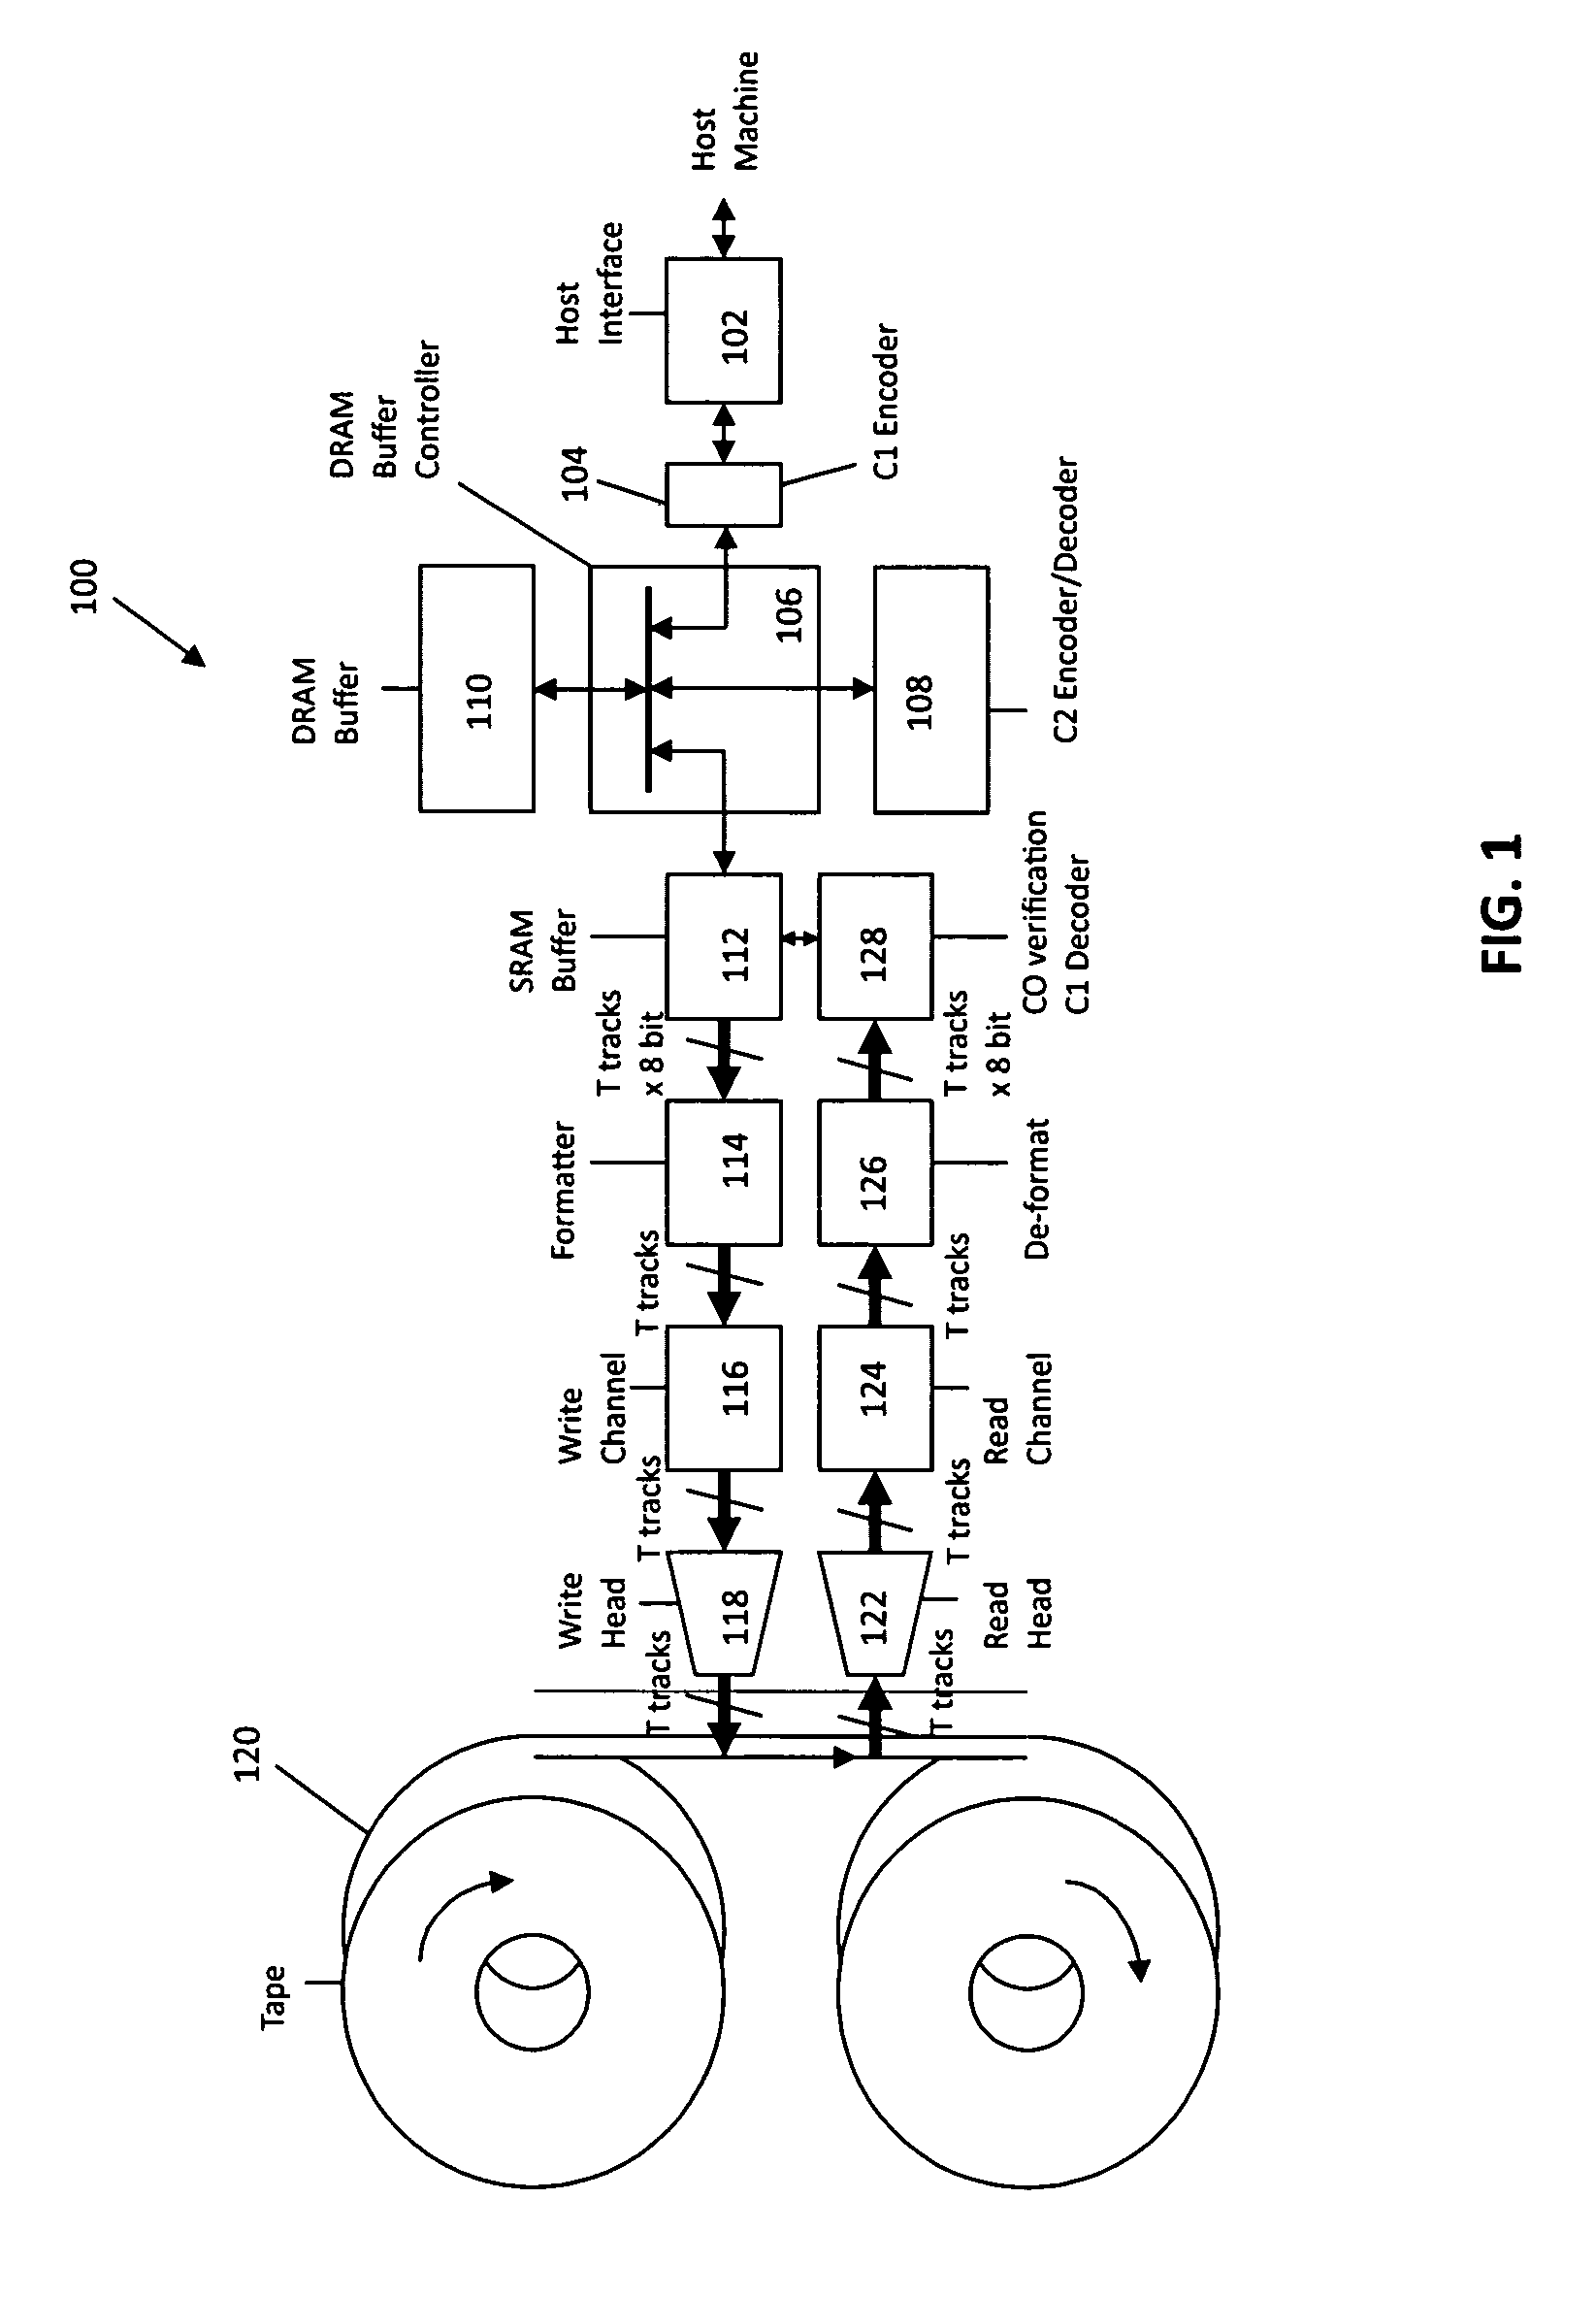 Rewriting codeword objects to magnetic data tape upon detection of an error